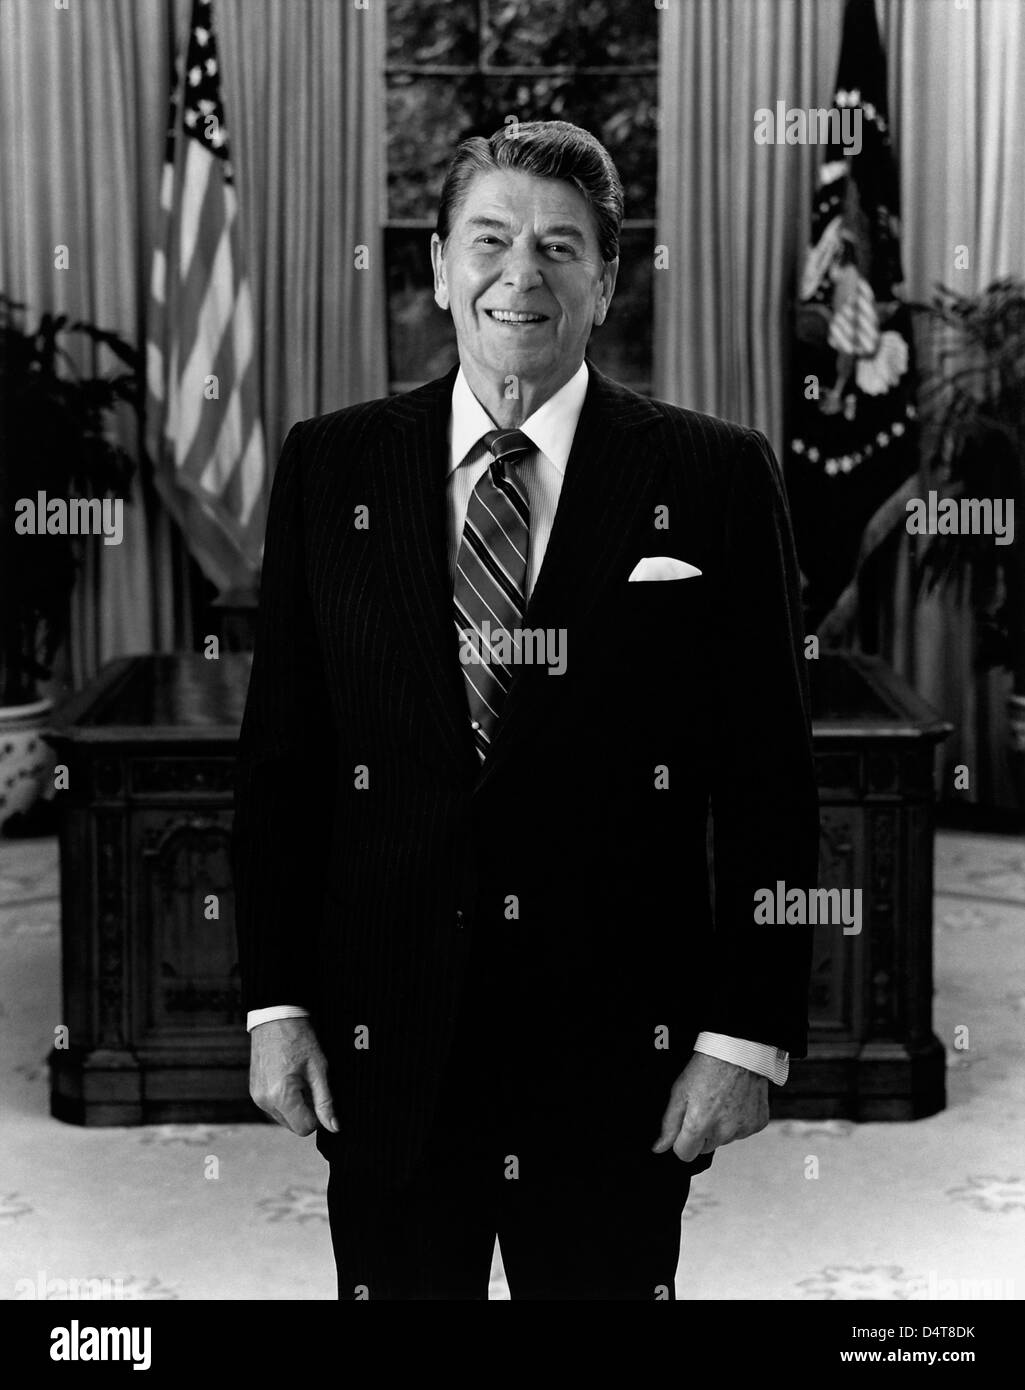 Digitally restored American history photo of President Ronald Reagan standing in the Oval Office. Stock Photo